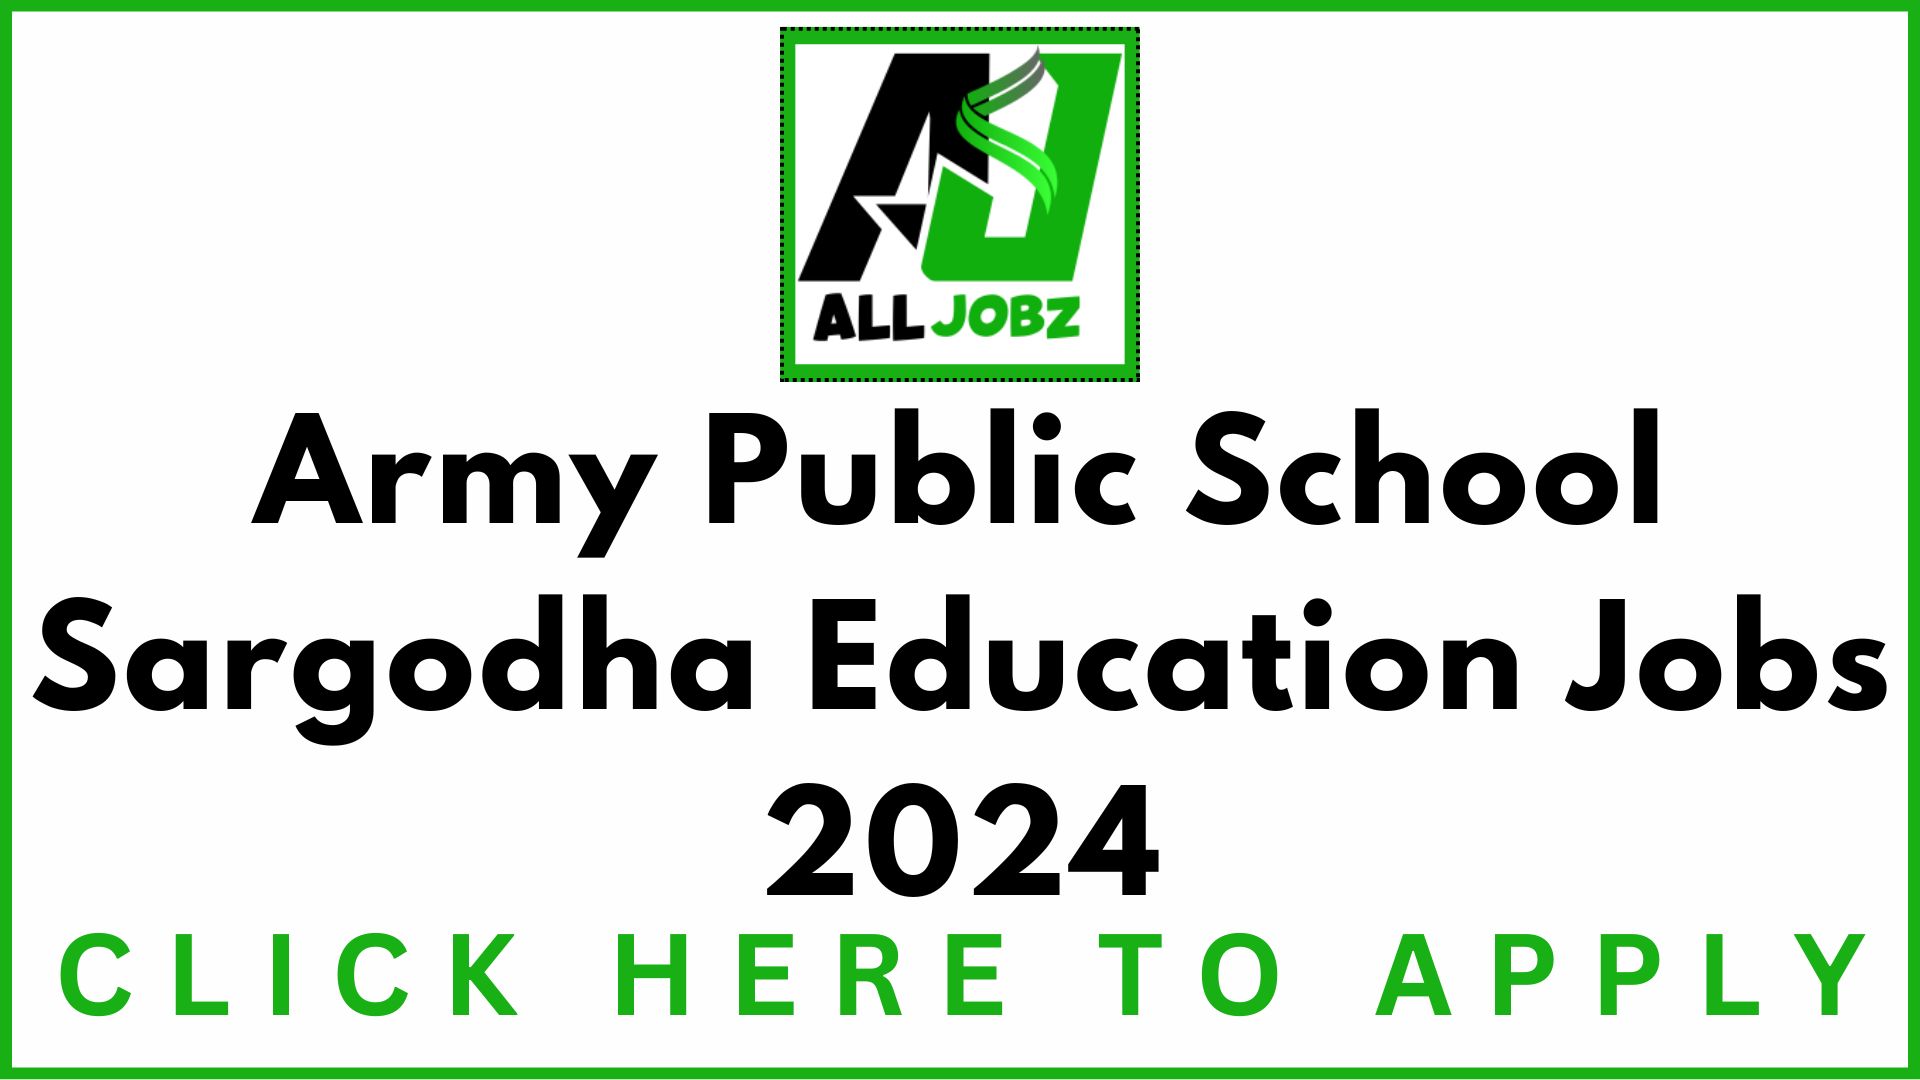 Army Public School Sargodha Education Jobs For International Studies (Apsis) Cantt Is Inviting Applications For Teaching Positions At The Cambridge Campus. Army Public School Sargodha Education Jobs 2024, Army Public School Jobs Sargodha, Army Public School Jobs 2024, Army Public School Jobs For Female, Army Public School Jobs In Pakistan. This Is An Excellent Opportunity For Dedicated And Qualified Educators To Join A Prestigious Institution Known For Its Commitment To Academic Excellence. Army Public School Sargodha Education Jobs, Army Public School Sargodha Education Jobs 2024, Army Public School Jobs Sargodha, Army Public School Jobs 2024, Army Public School Jobs For Female, Army Public School Jobs In Pakistan, Army Public School Sargodha Jobs Salary, Army Public School Sargodha Jobs 2024, Army Public School Sargodha Jobs For Female, Army Public School Sargodha Teaching Vacant Positions, Army Public School Sargodha Jobs 2024, Army Public School Sargodha Contact Number, School Jobs Sargodha,